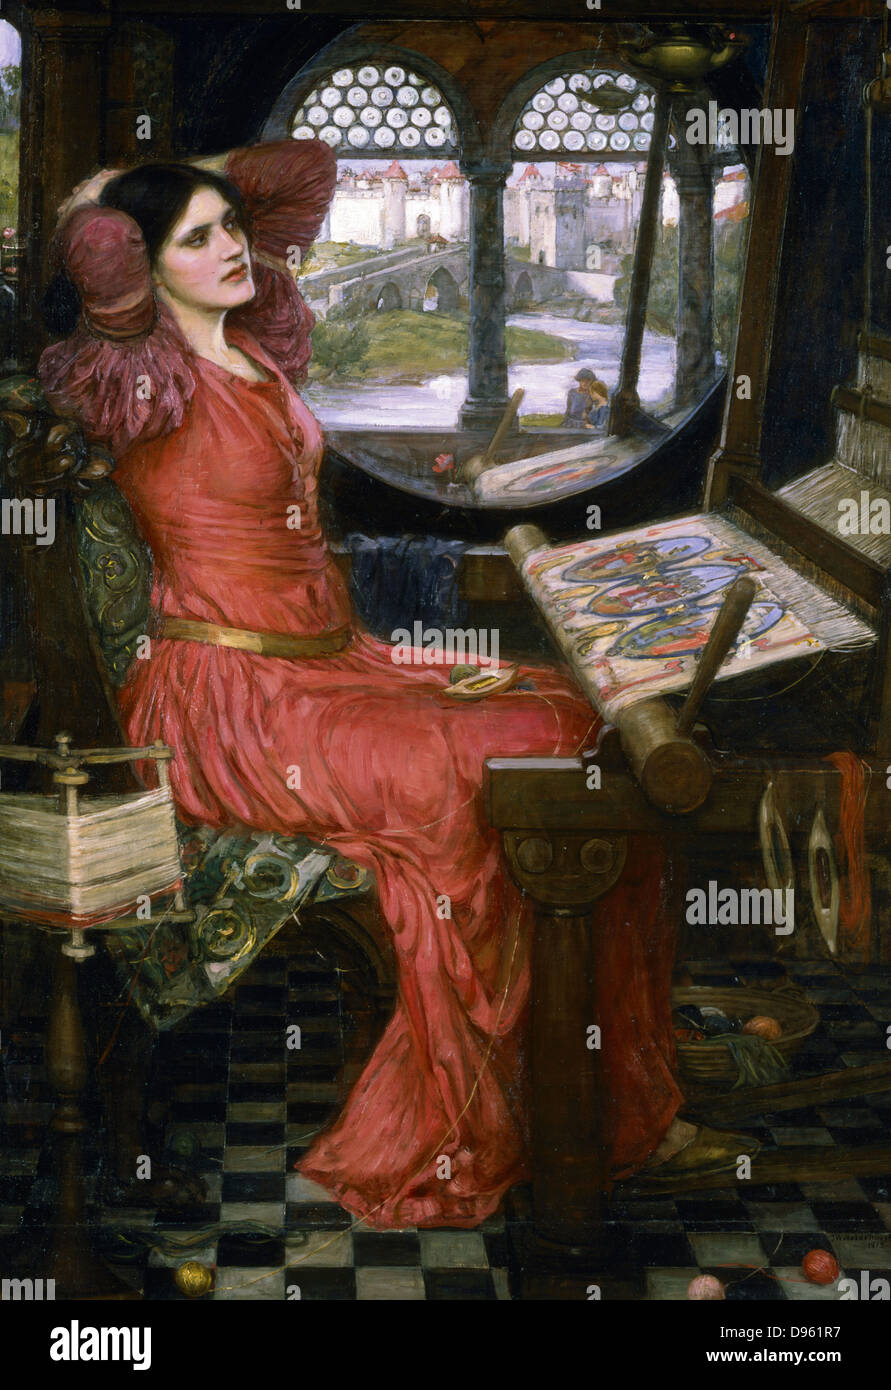 I am Half Sick of Shadows, said the Lady of Shalott' (1915).  Illustration of Tennyson's poem of Arthurian legend showing the Lady of Shallot bored with her weaving. Beside her is the window she will look through and fall fatally in love with Sir Lancelot. John William Waterhouse (1849-1917) English painter. Musee des Beaux Arts de l'Ontario, Canada. Stock Photo